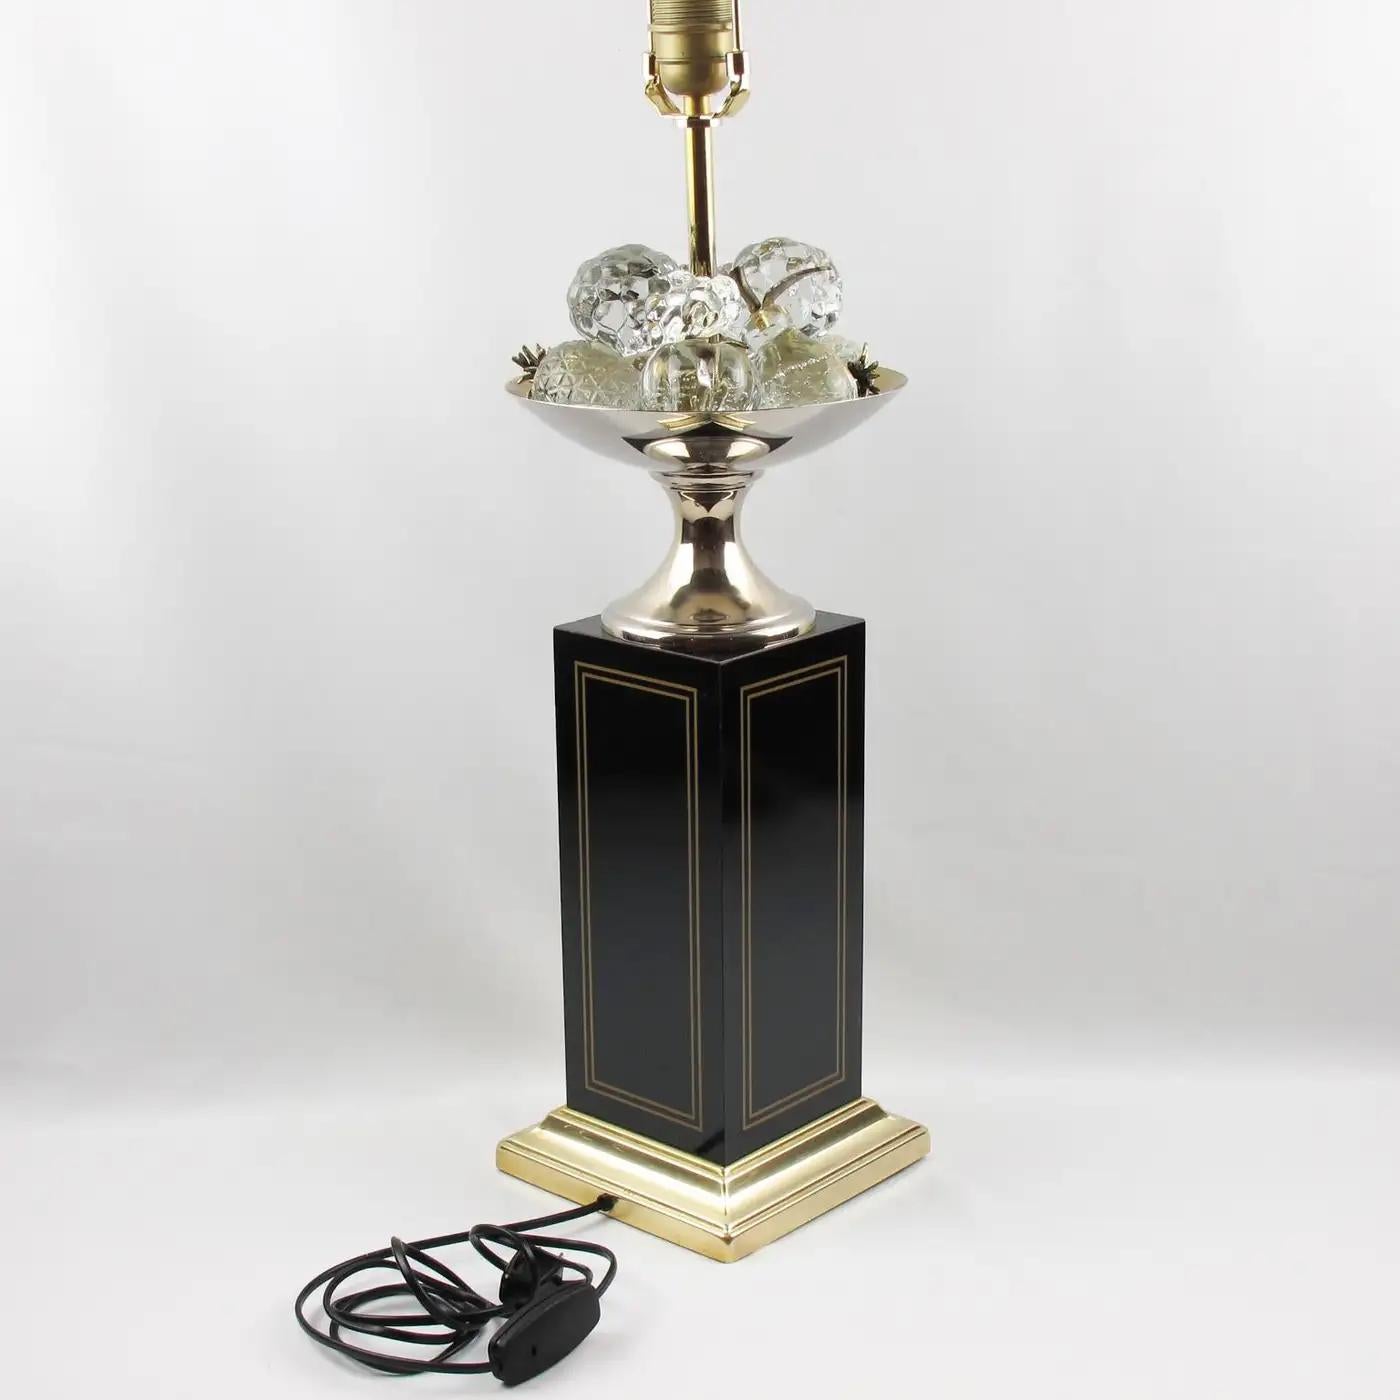 Mid-20th Century Maison Charles Table Lamp Black Enamel and Crystal Fruits, France 1960s For Sale